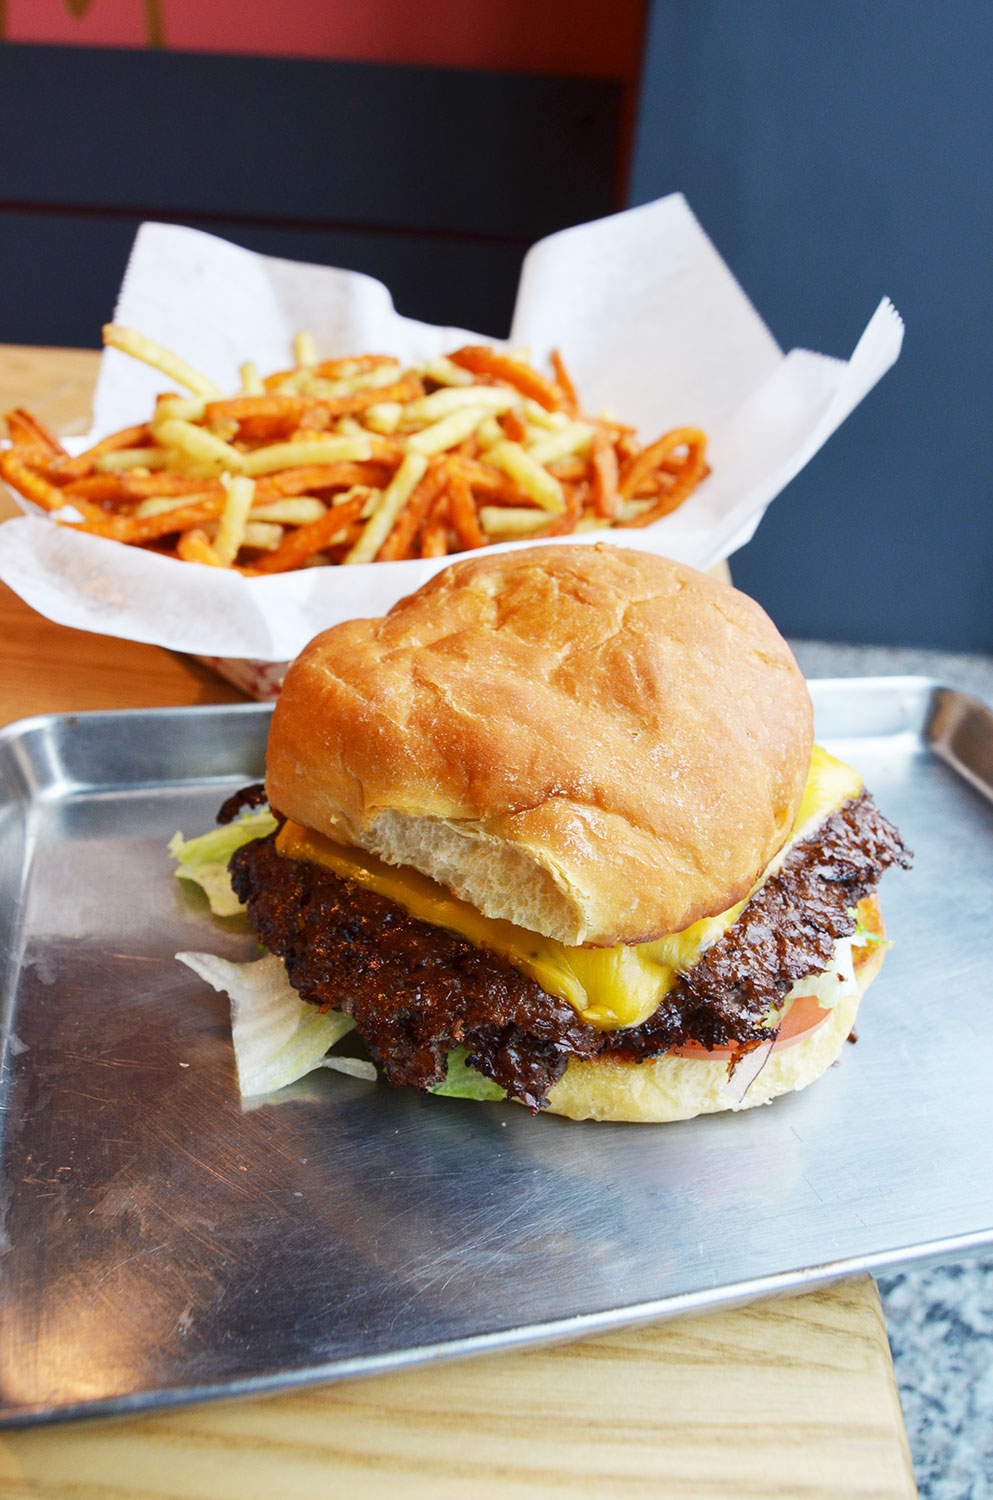 Sauce Magazine - First Look: Burger Champ in Maplewood